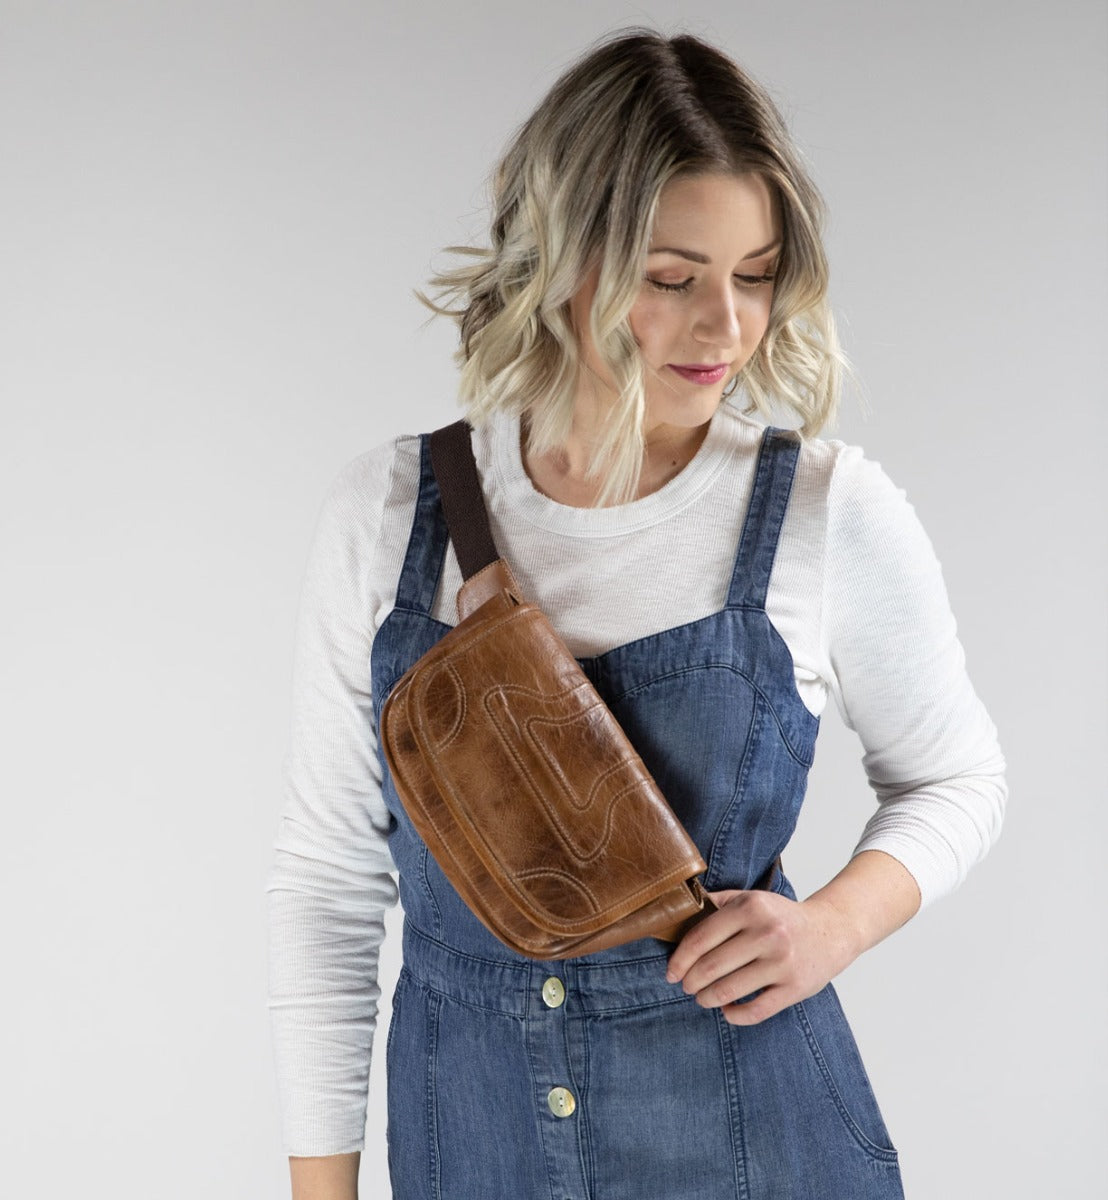 A woman wearing Travers denim overalls and a Bed Stu brown fanny bag.